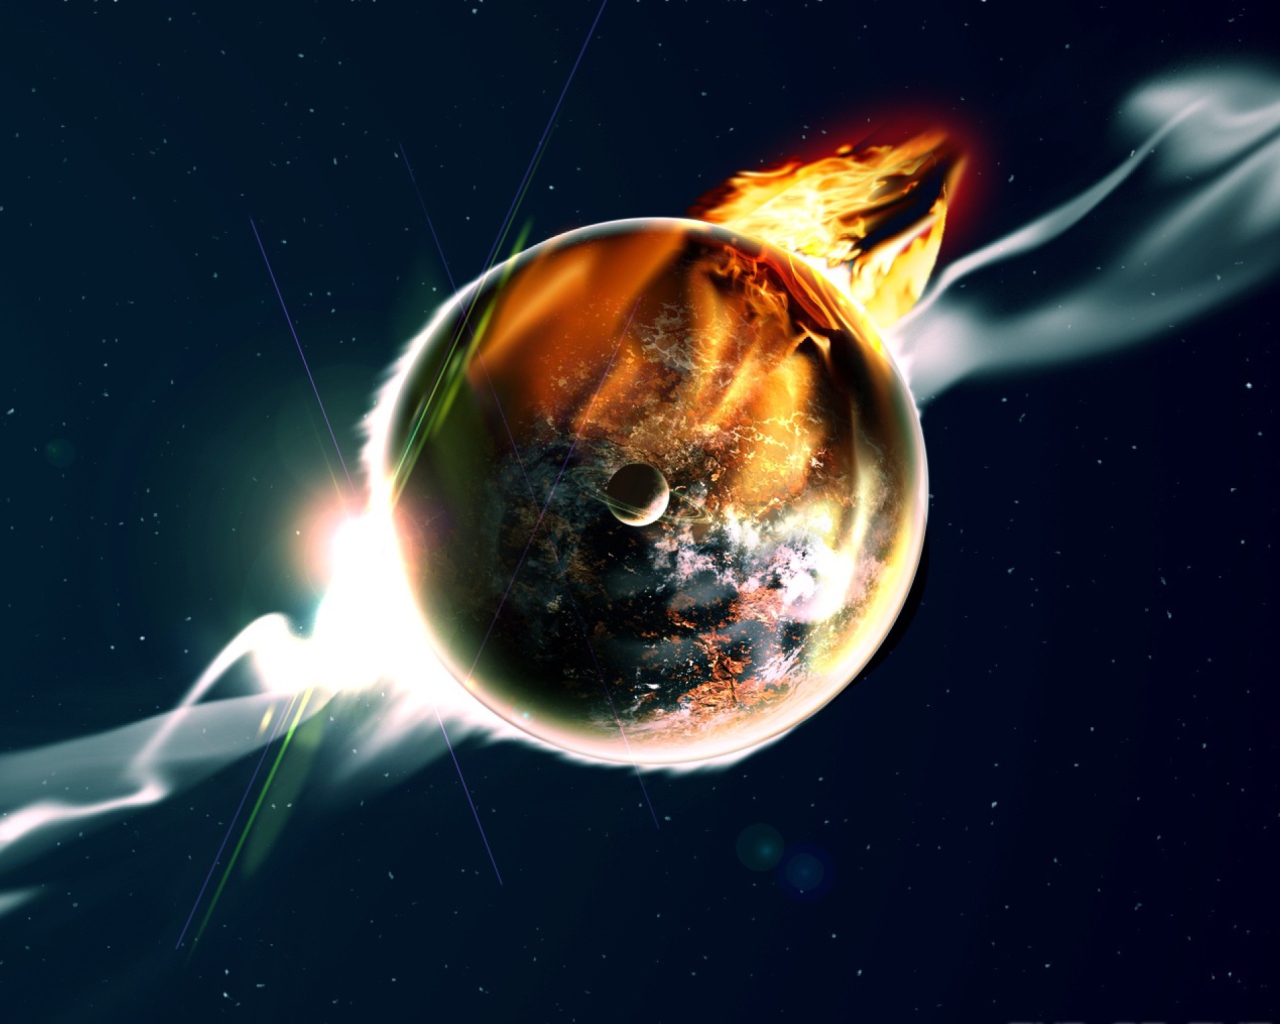 End Of The World wallpaper 1280x1024